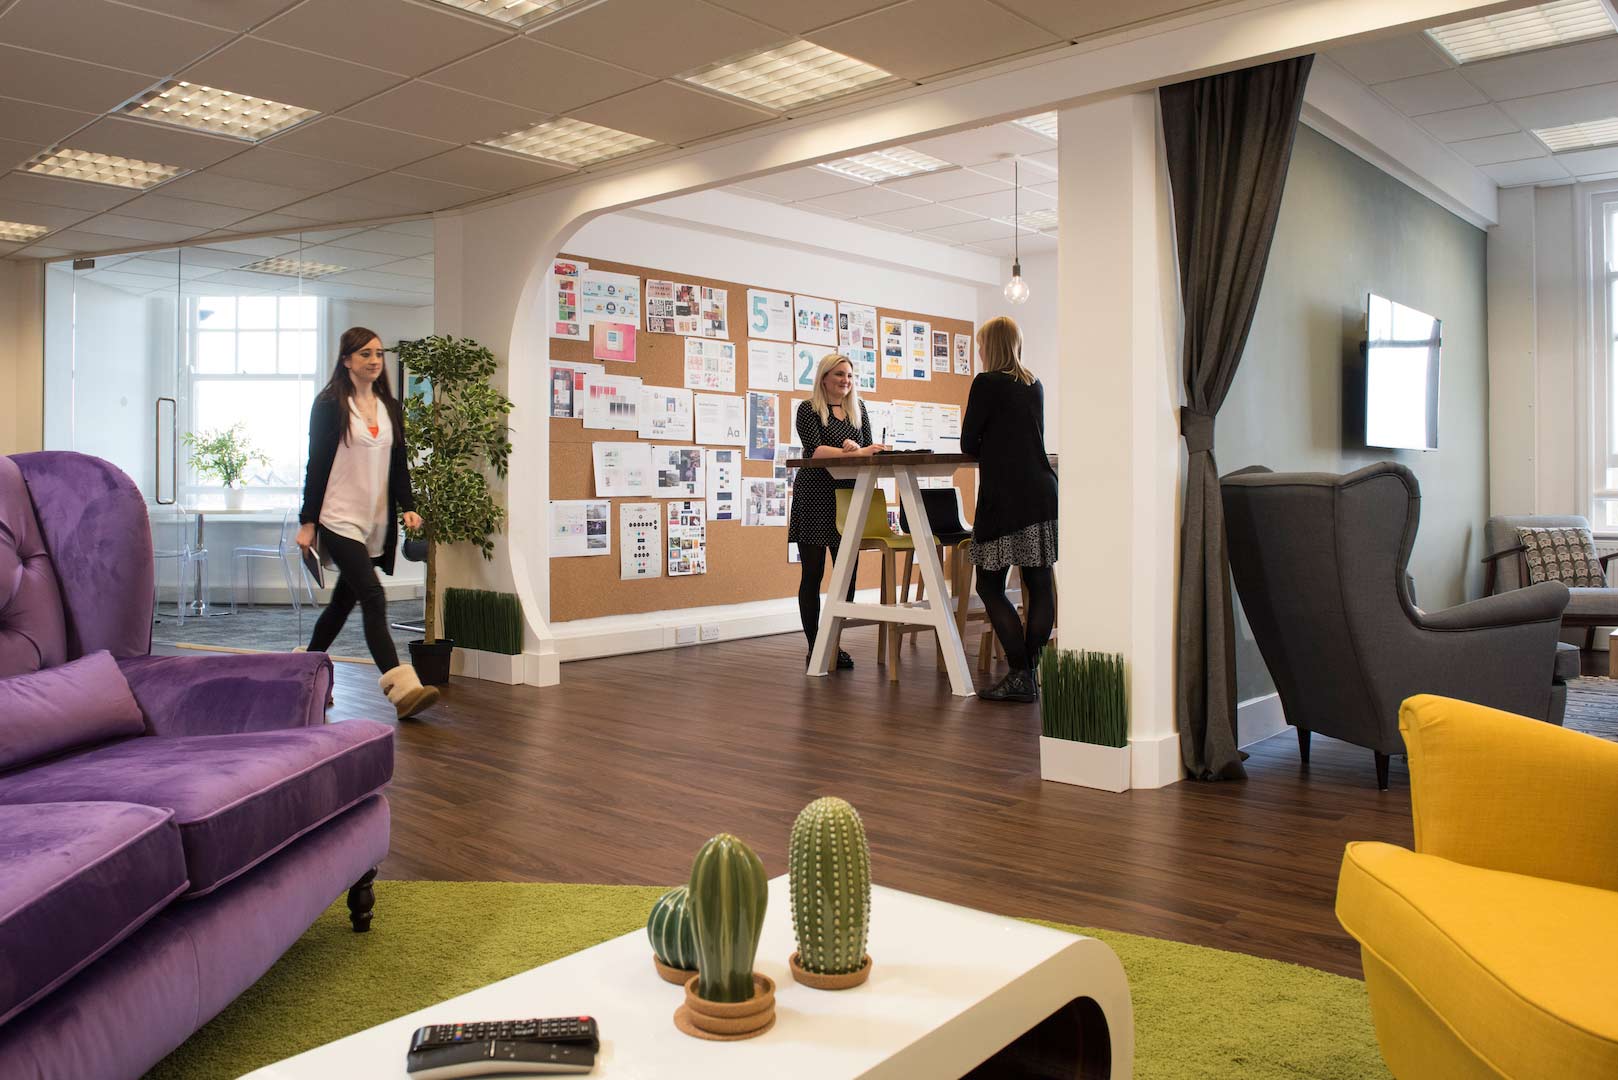 The Harrogate office expansion provides additional work space for Extreme's growing team of creatives